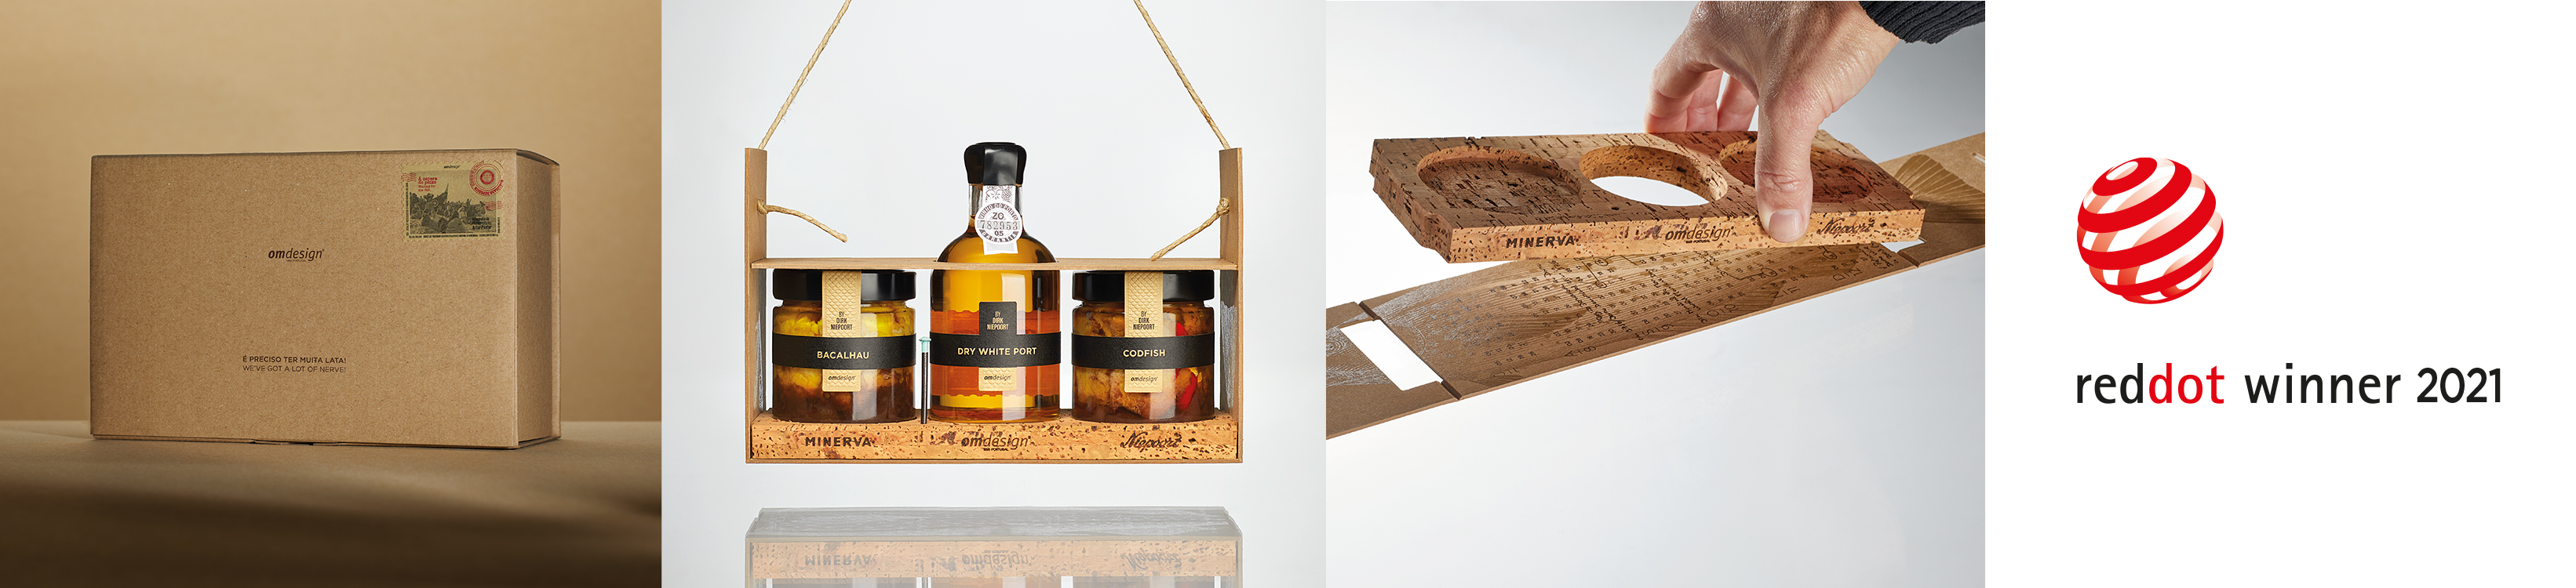 Omdesign wins Red Dot with a self-promotion packaging